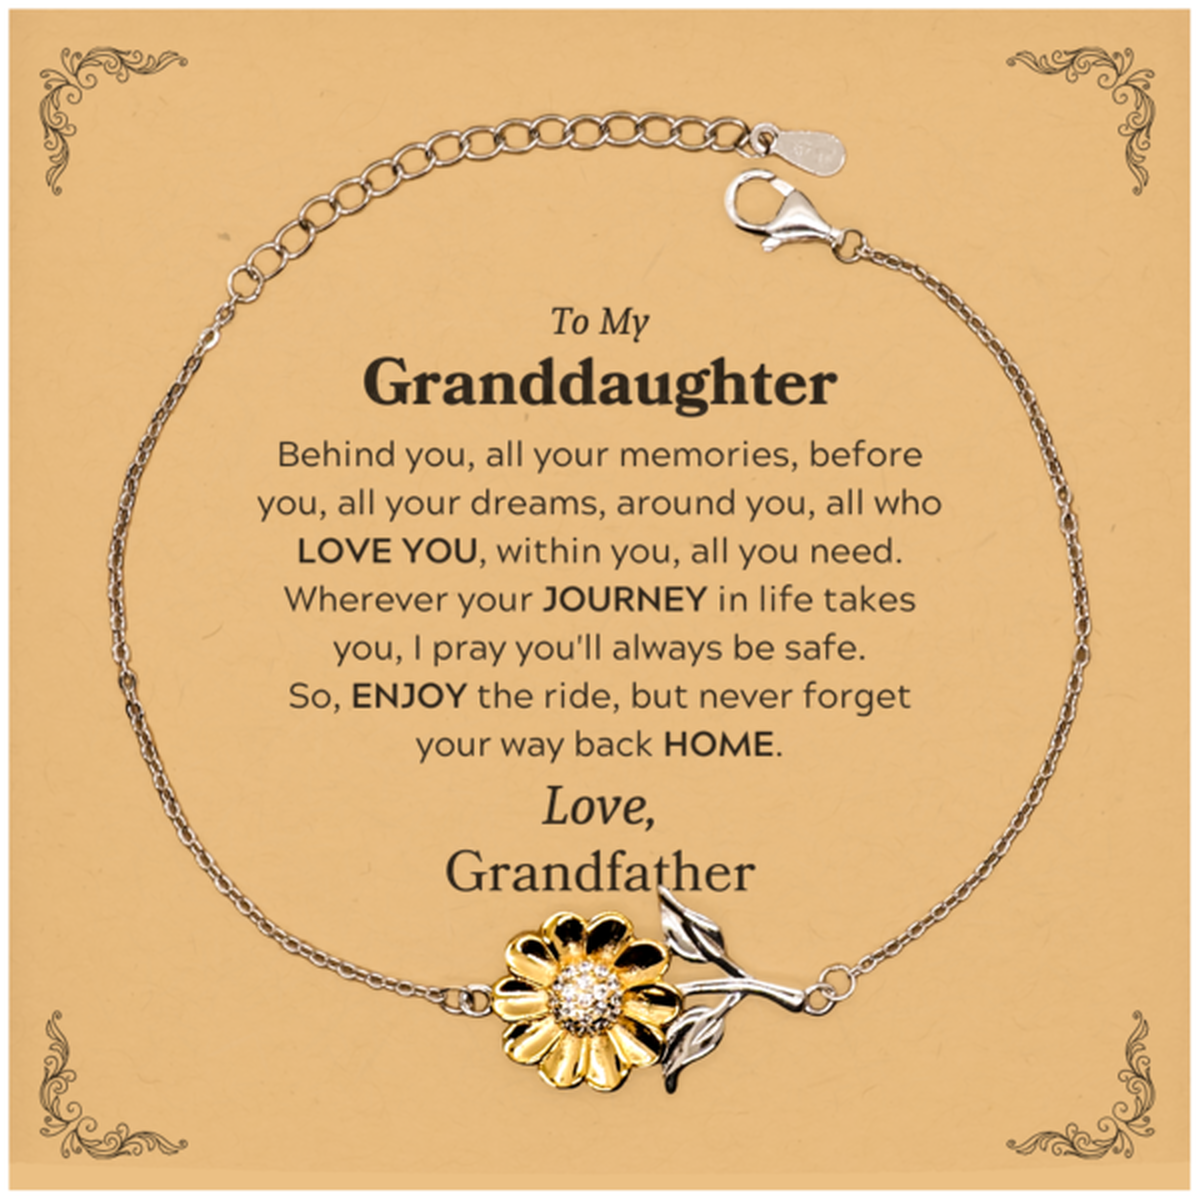 To My Granddaughter Graduation Gifts from Grandfather, Granddaughter Sunflower Bracelet Christmas Birthday Gifts for Granddaughter Behind you, all your memories, before you, all your dreams. Love, Grandfather